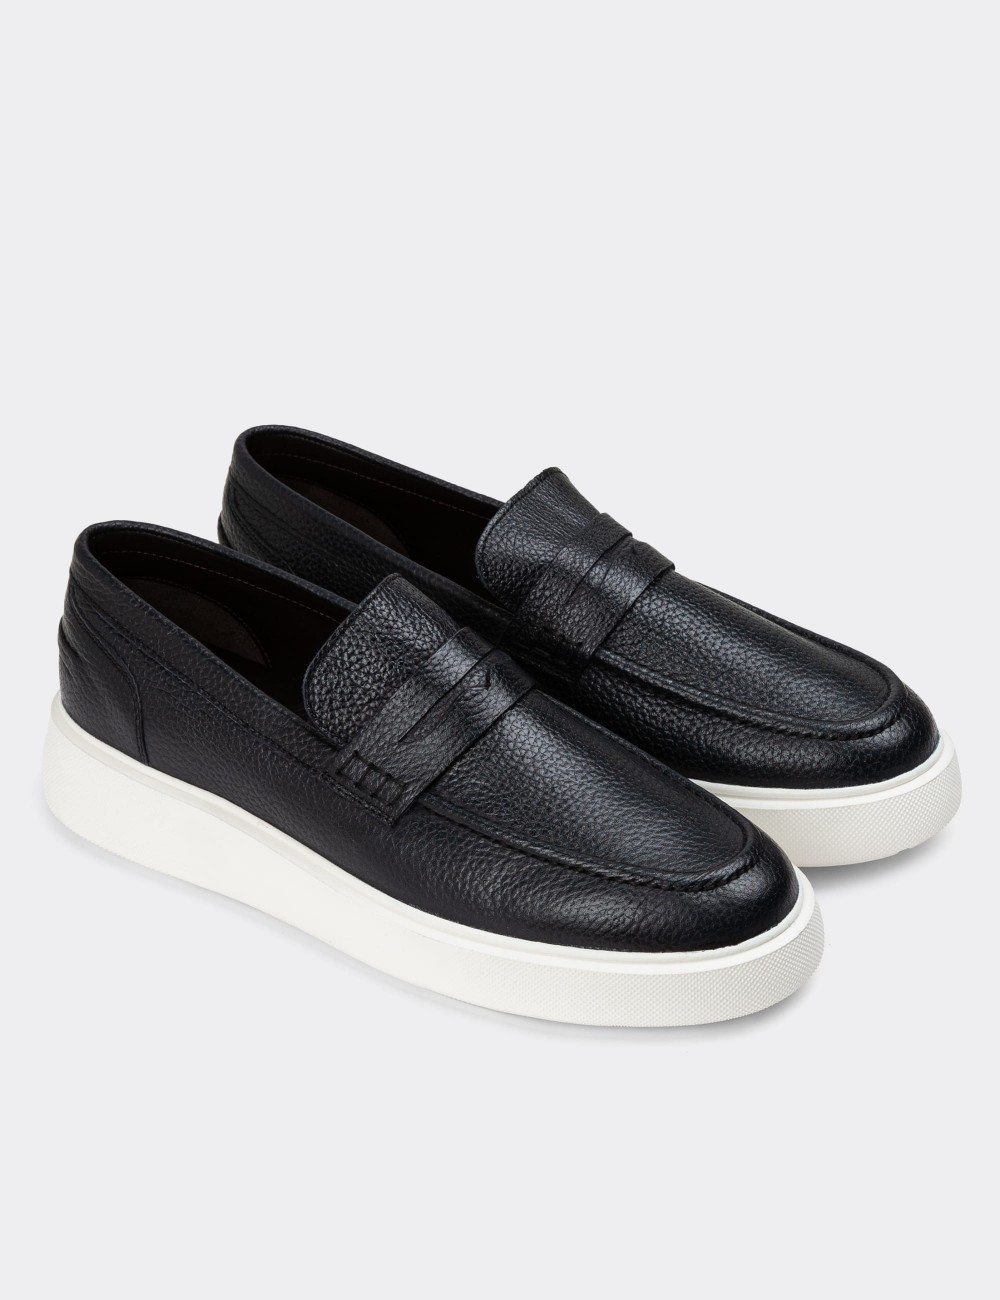 Navy Leather Loafers - 01964MLCVE01